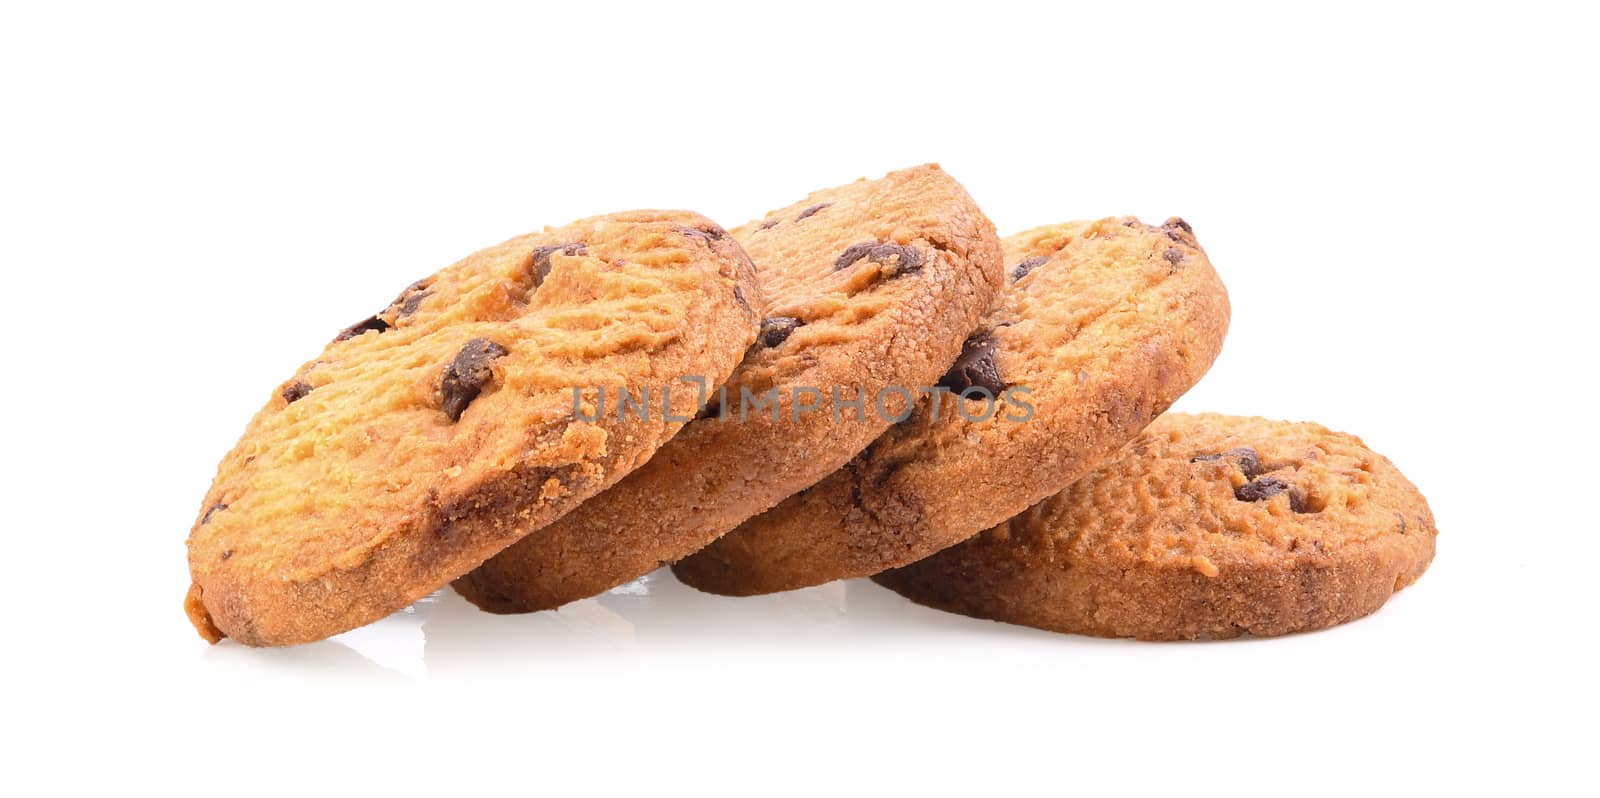 chocolate chip cookies on white background by sommai